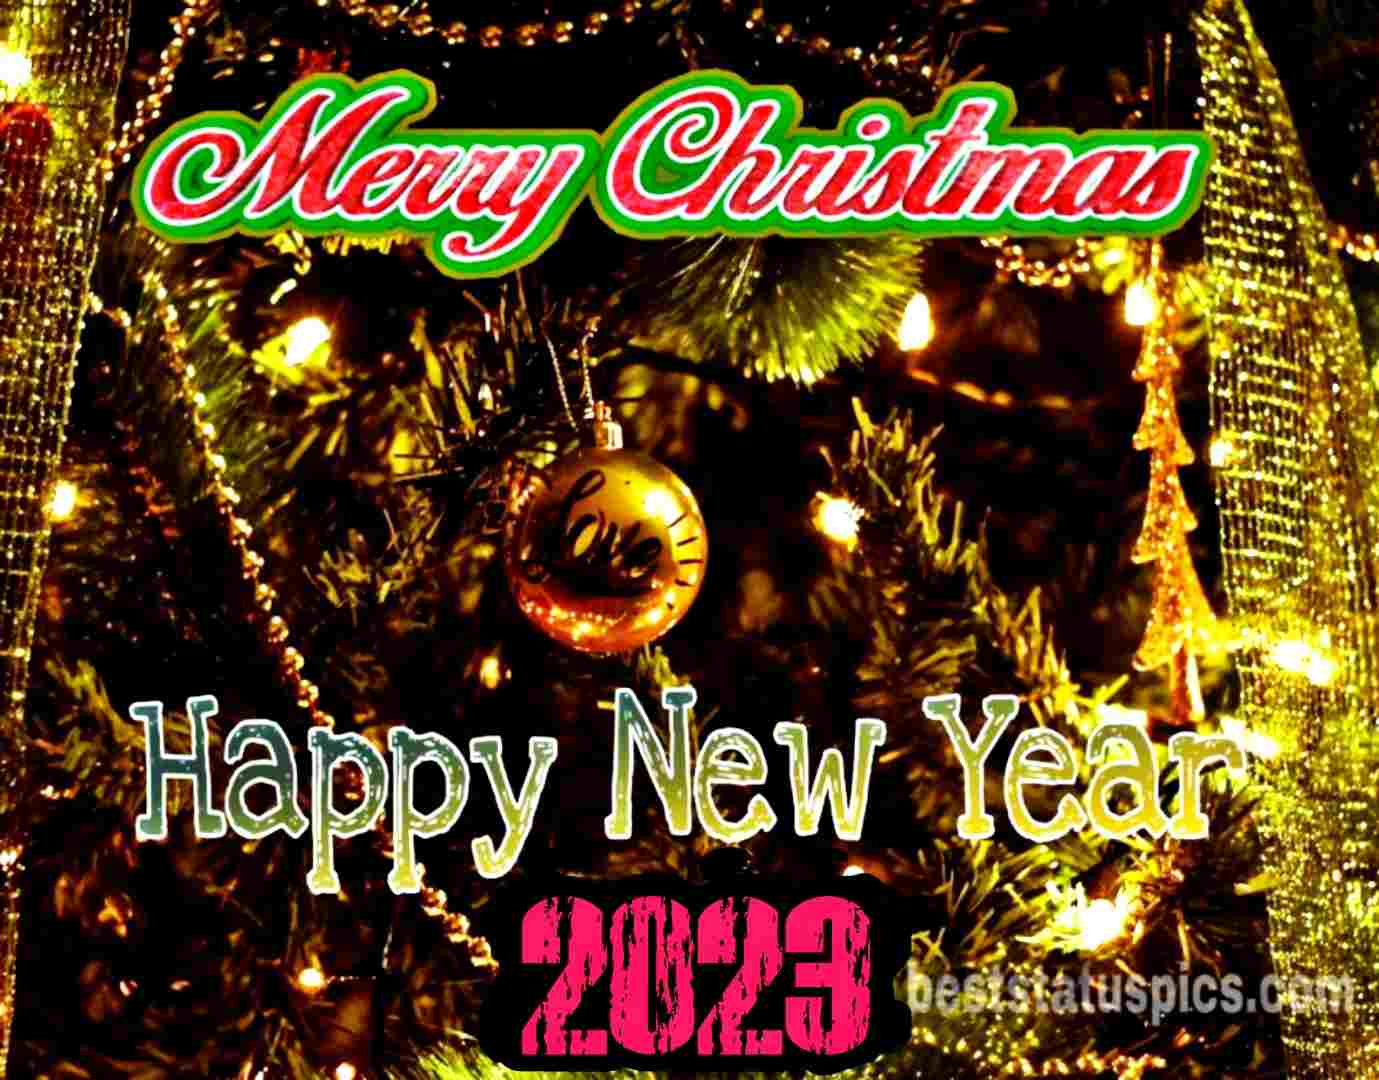 Merry Christmas and Happy New Year 2023 wishes picture with Christmas tree and ball